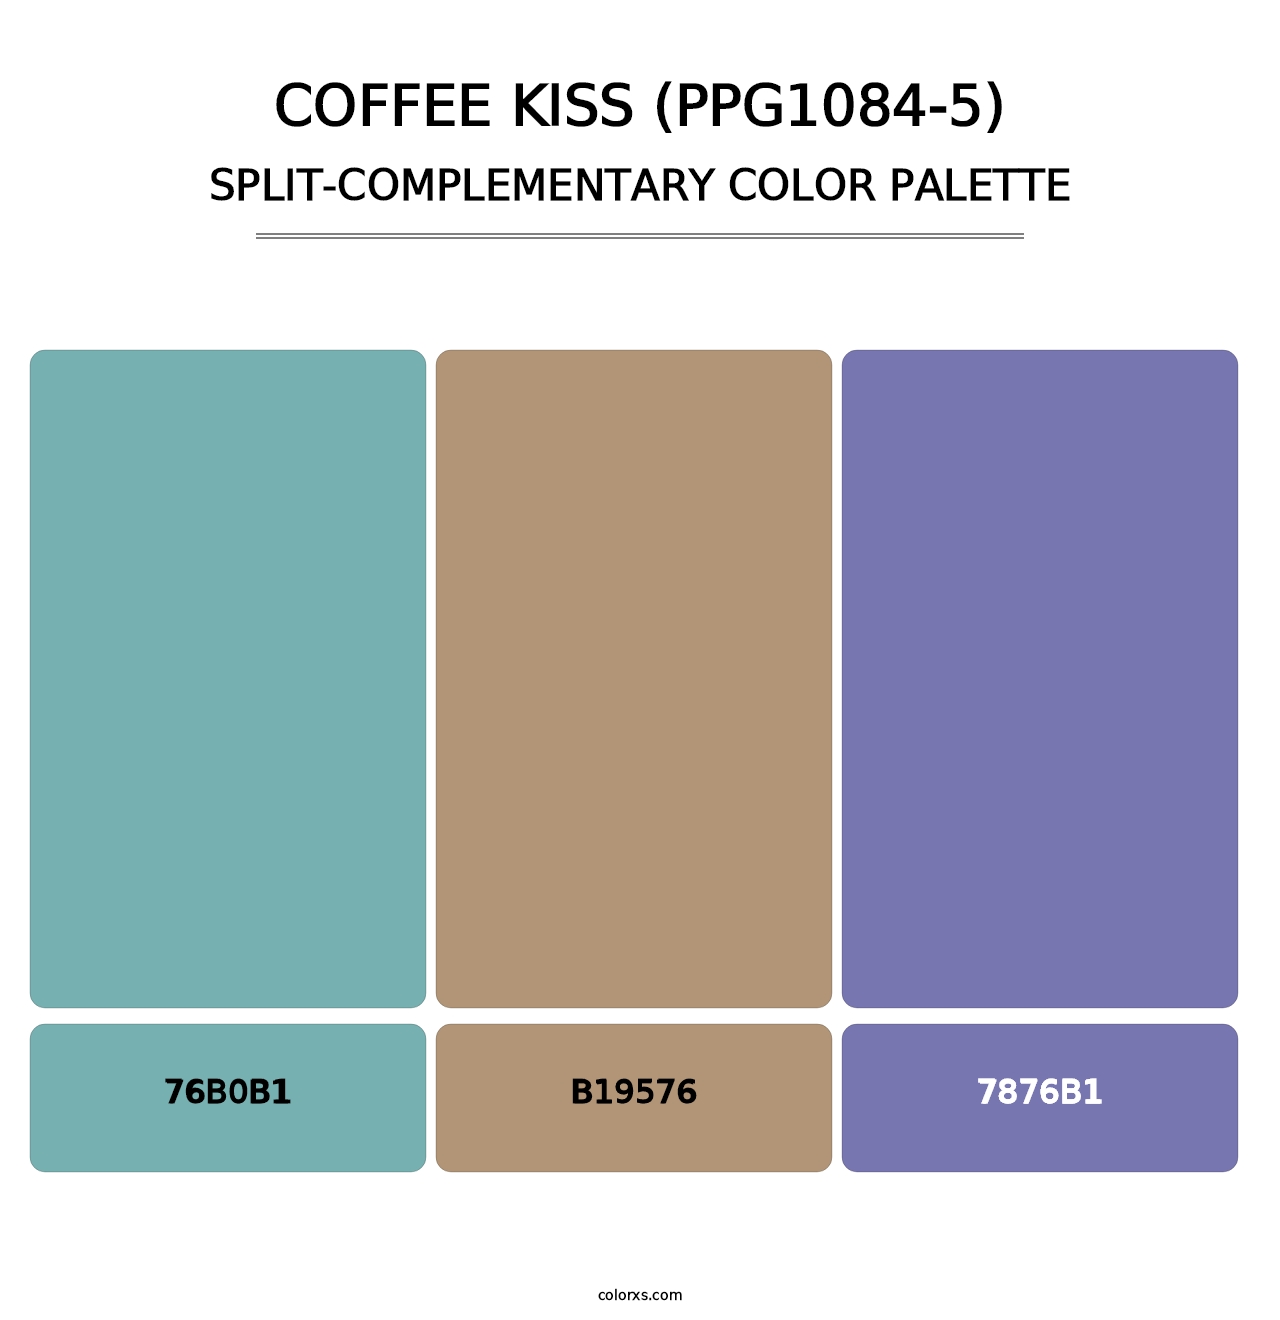 Coffee Kiss (PPG1084-5) - Split-Complementary Color Palette